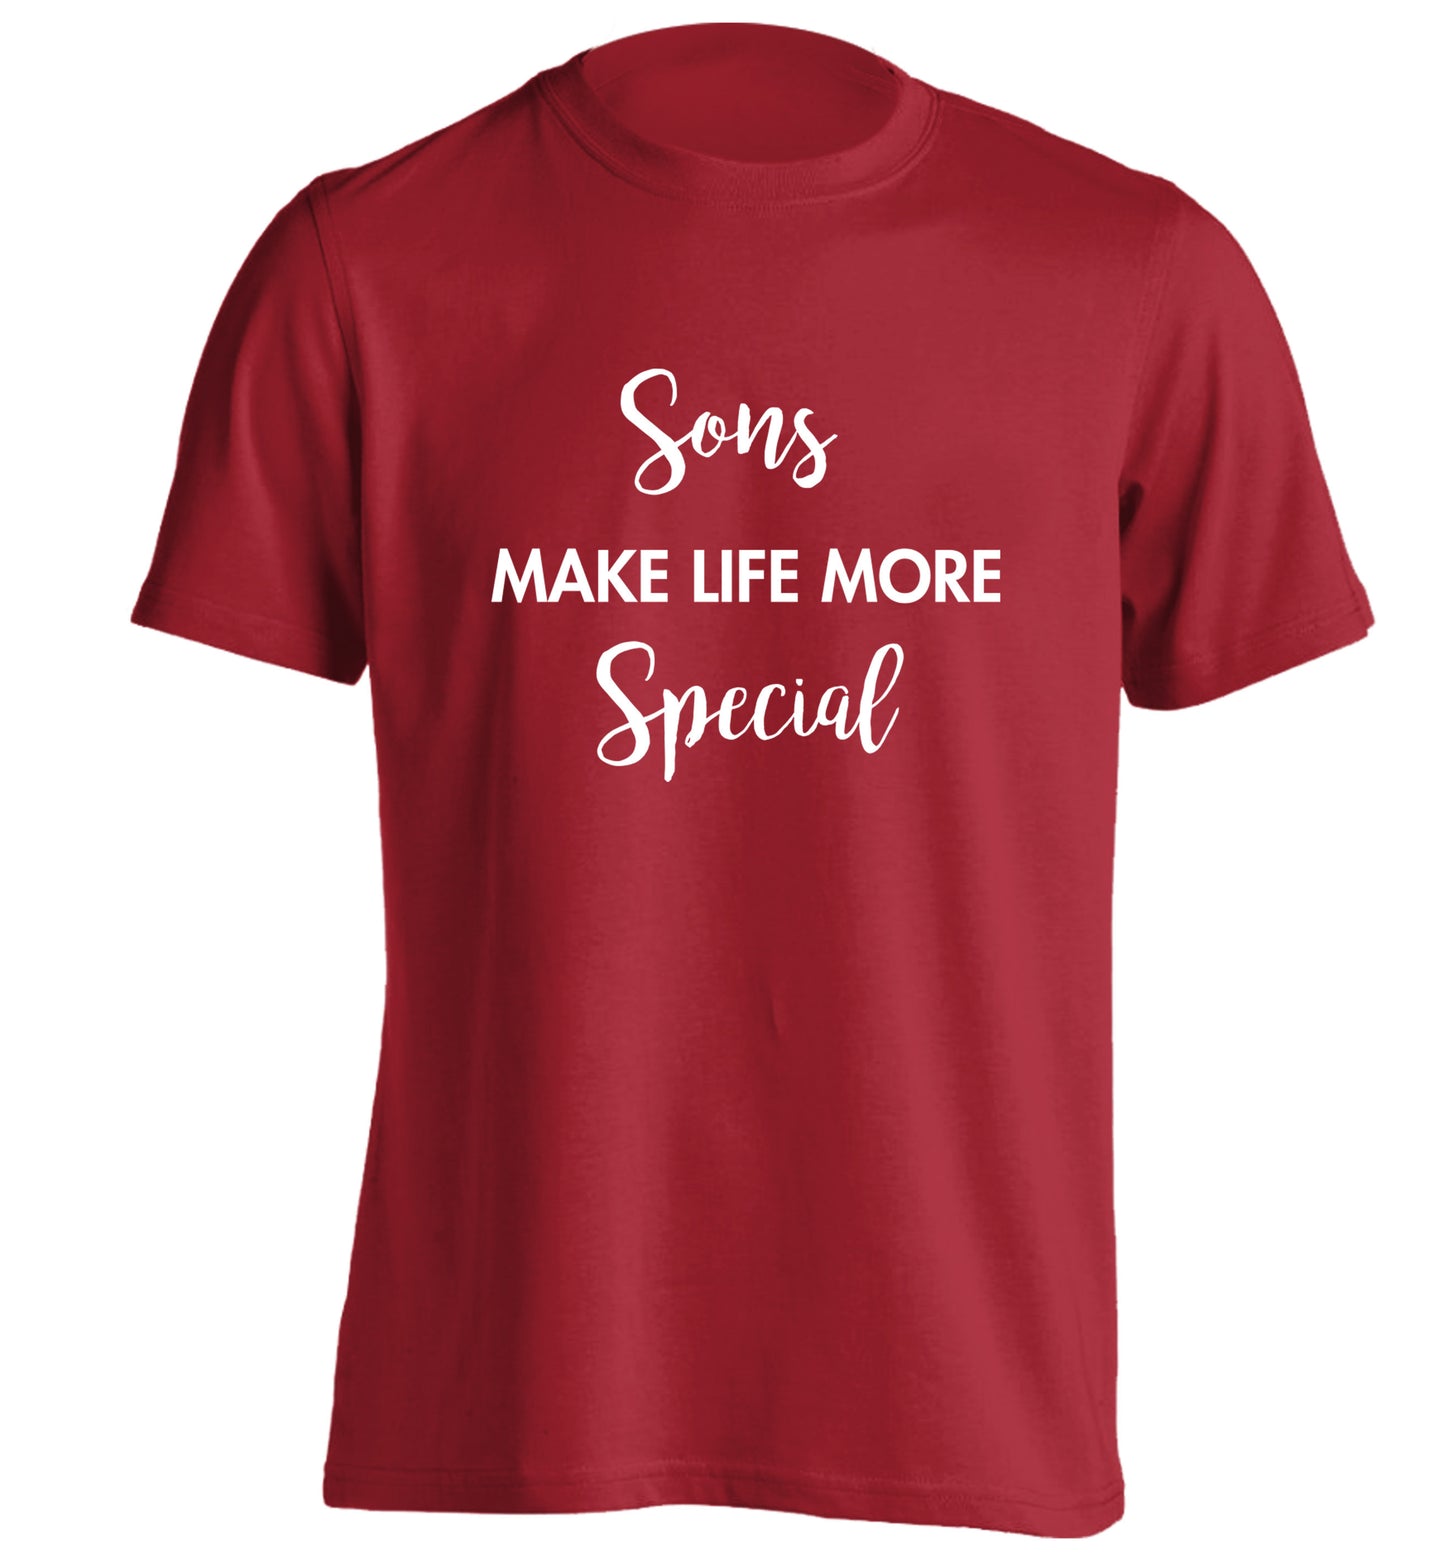 Sons make life more special adults unisex red Tshirt 2XL